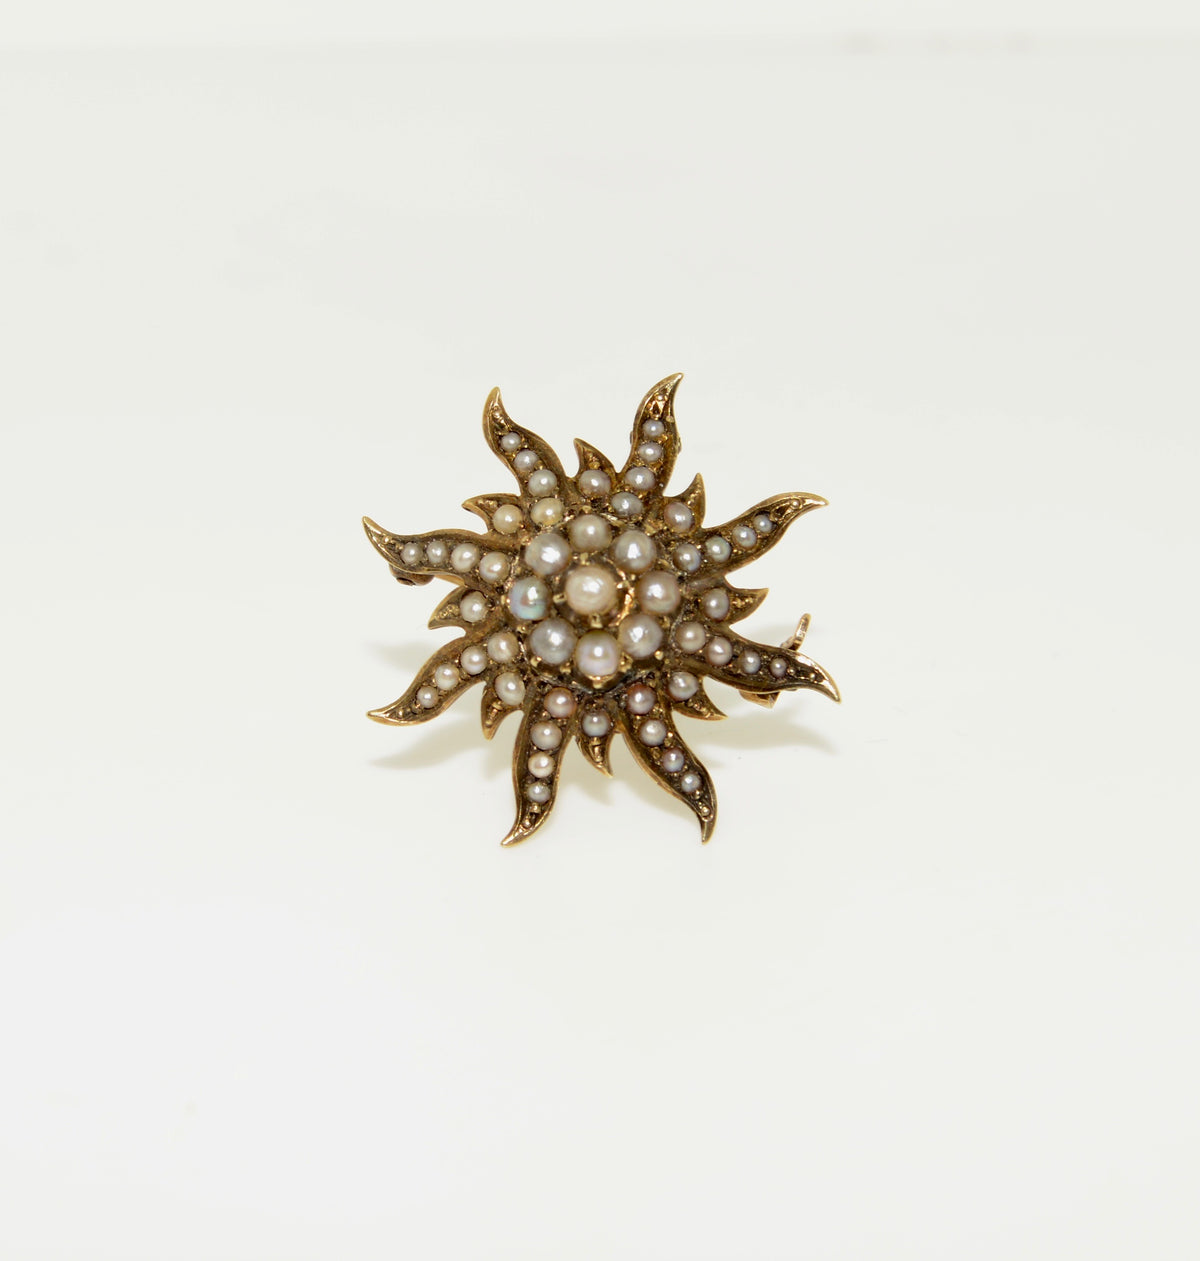 14K Yellow Gold Antique Sunburst Brooch with Seed Pearls